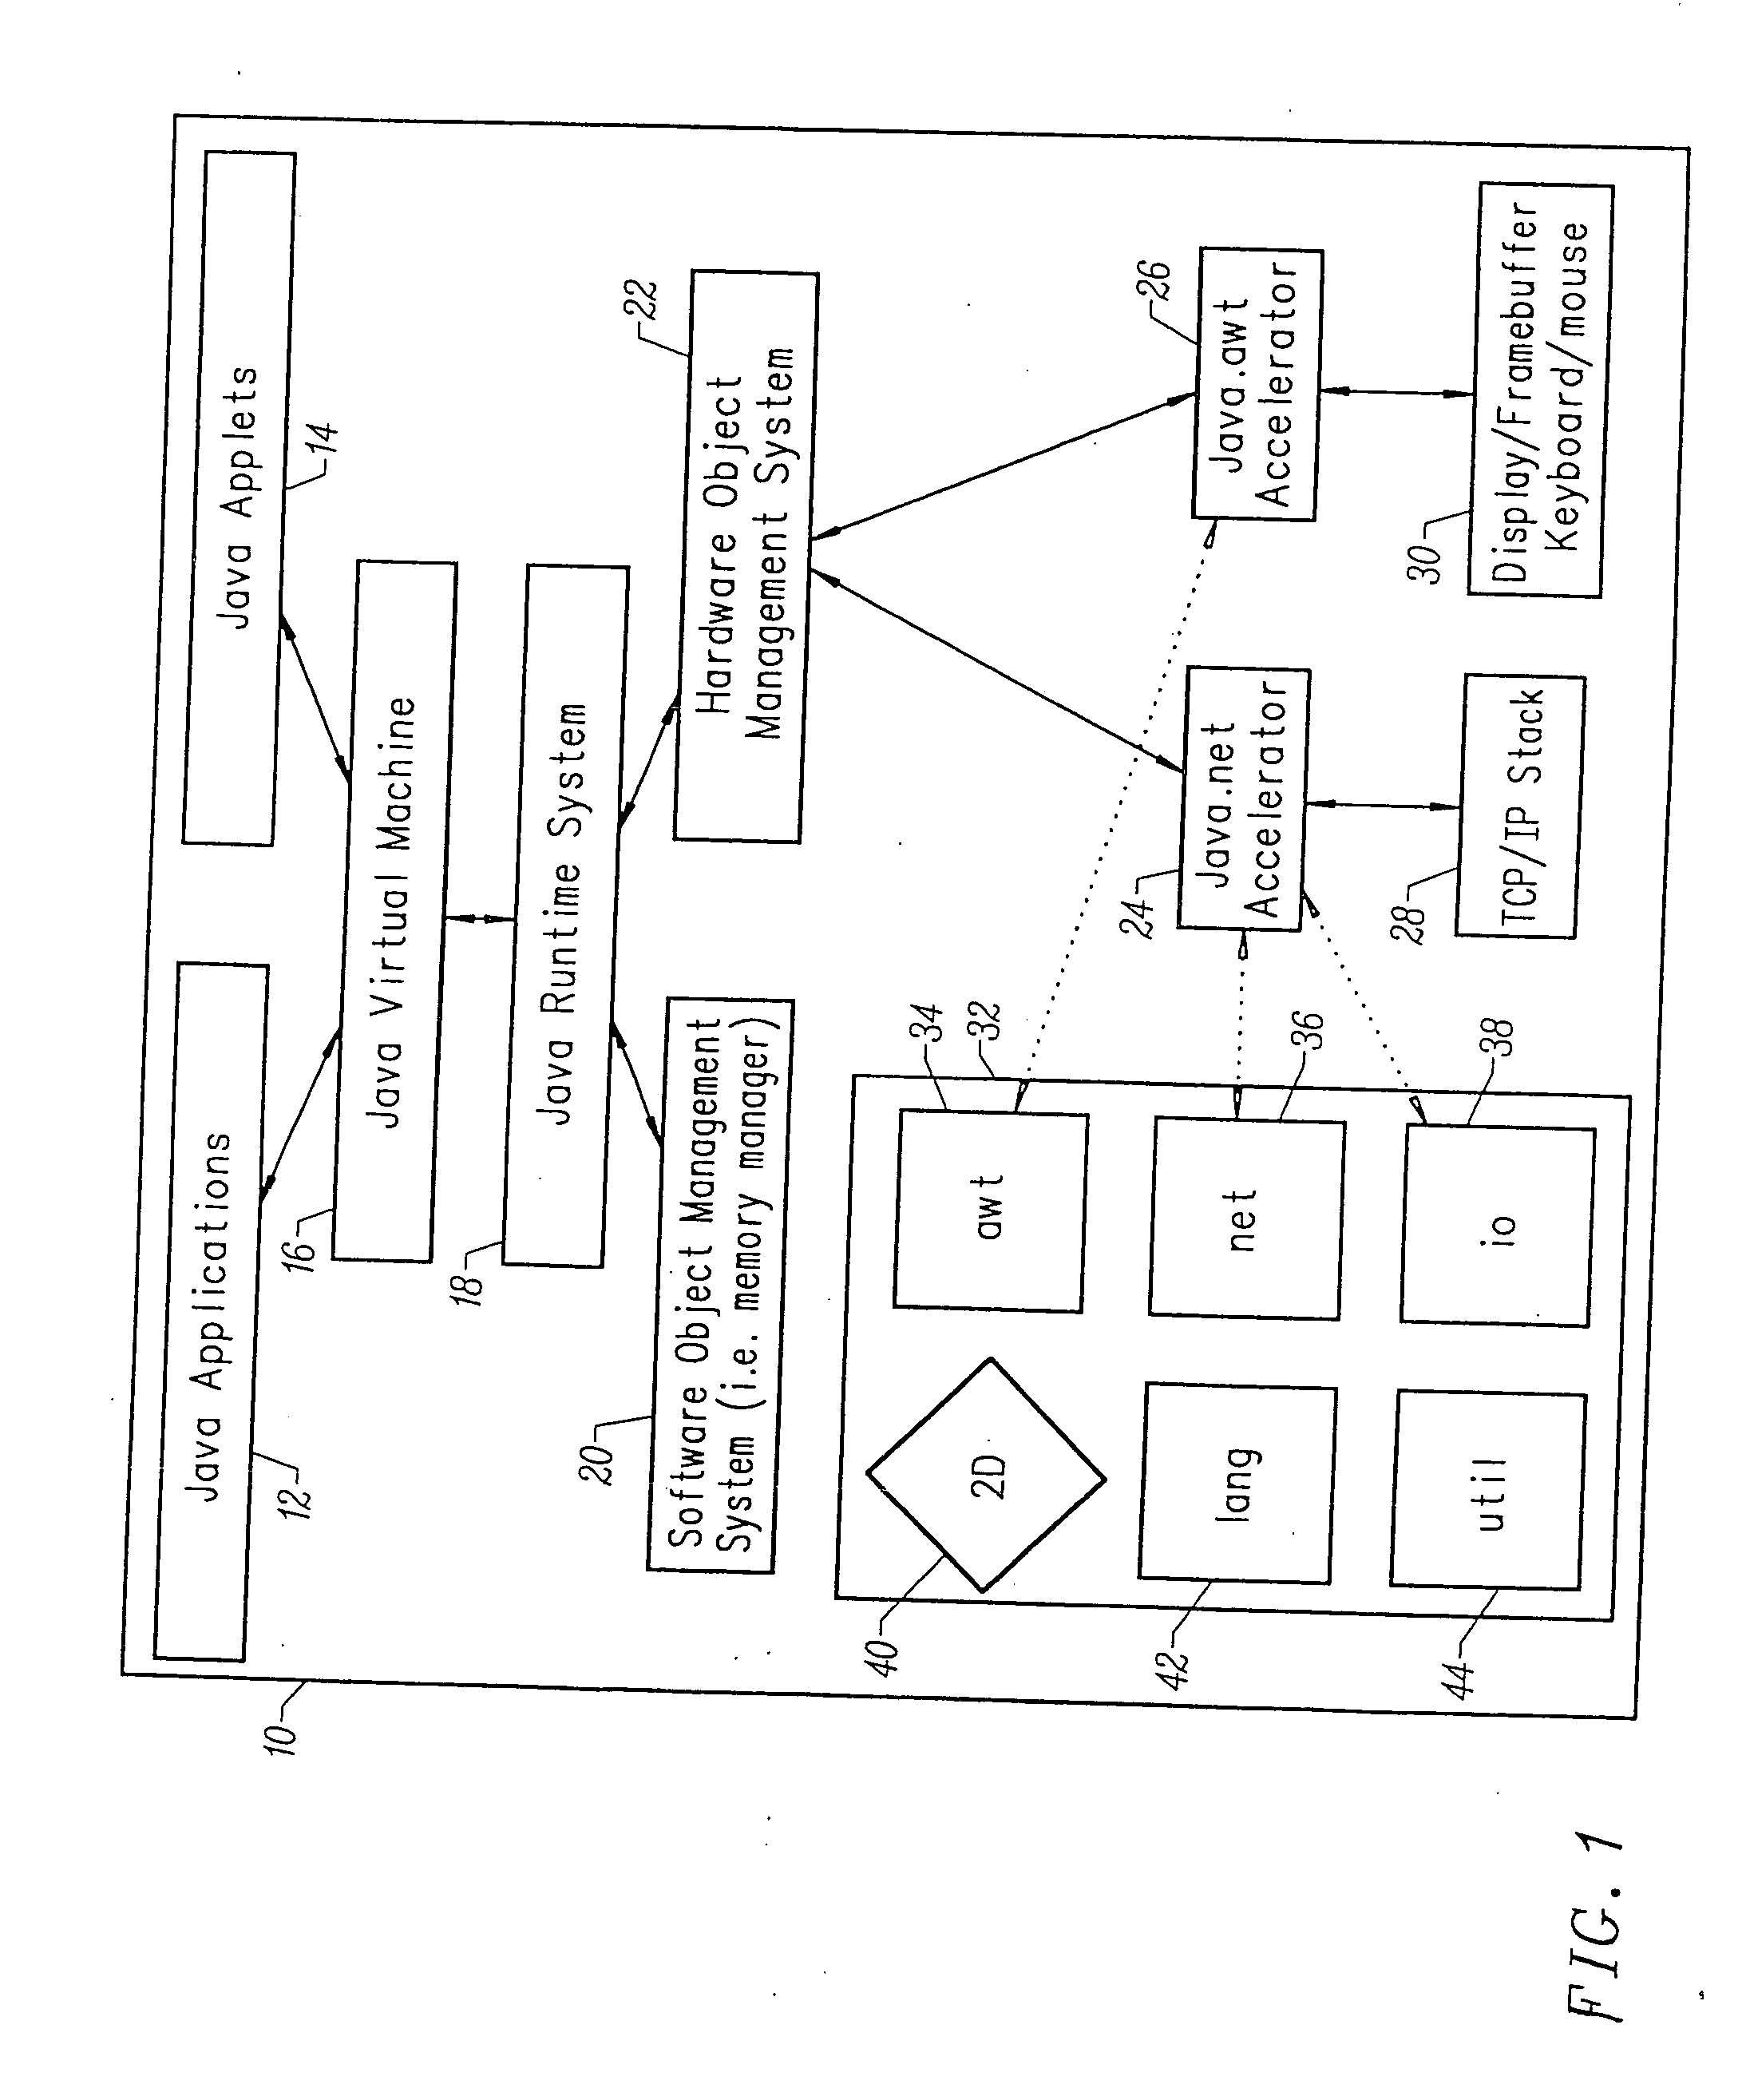 Offload system, method, and computer program product for port-related processing